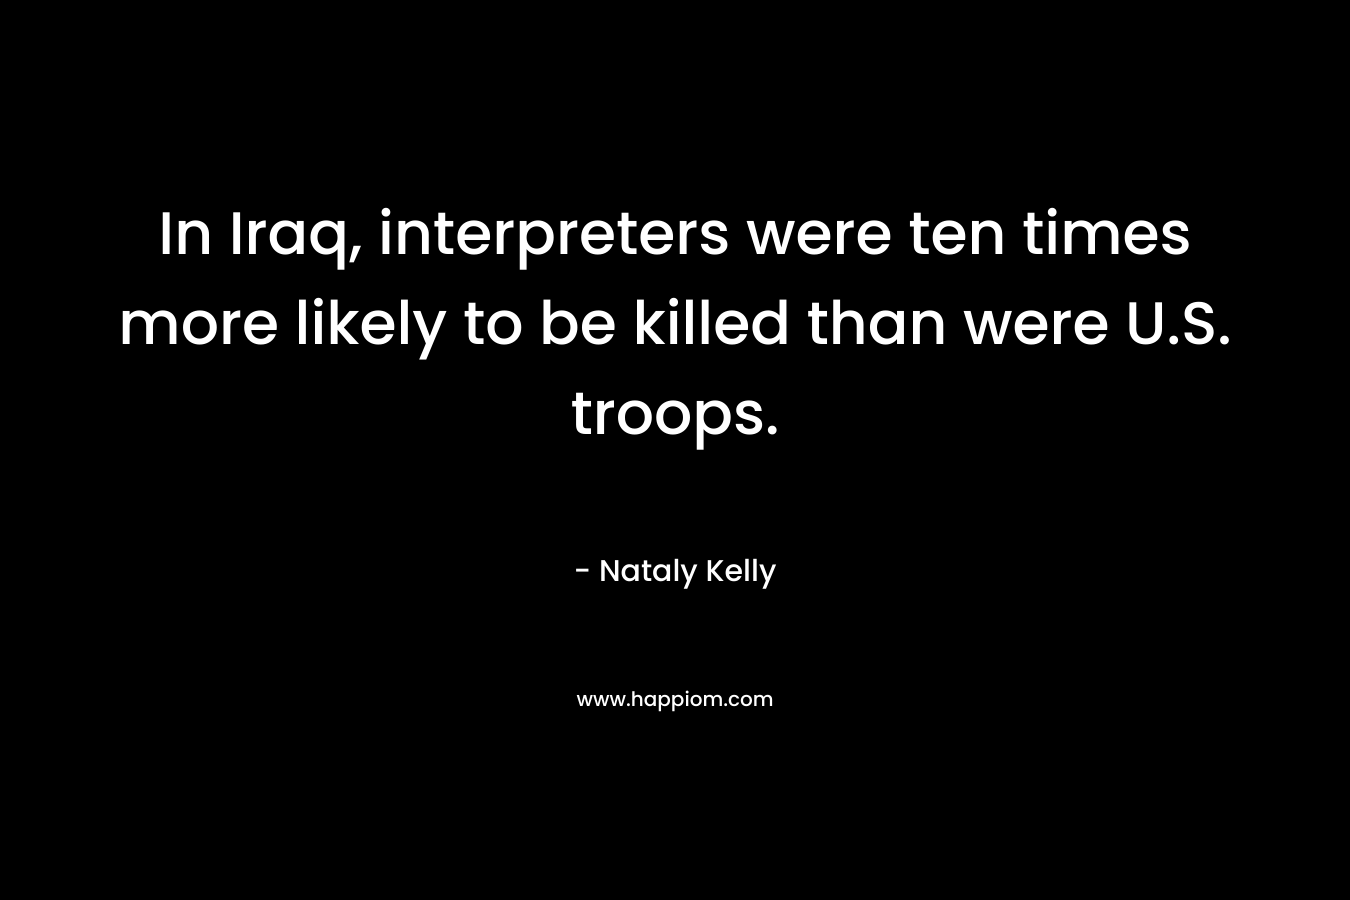 In Iraq, interpreters were ten times more likely to be killed than were U.S. troops. – Nataly Kelly